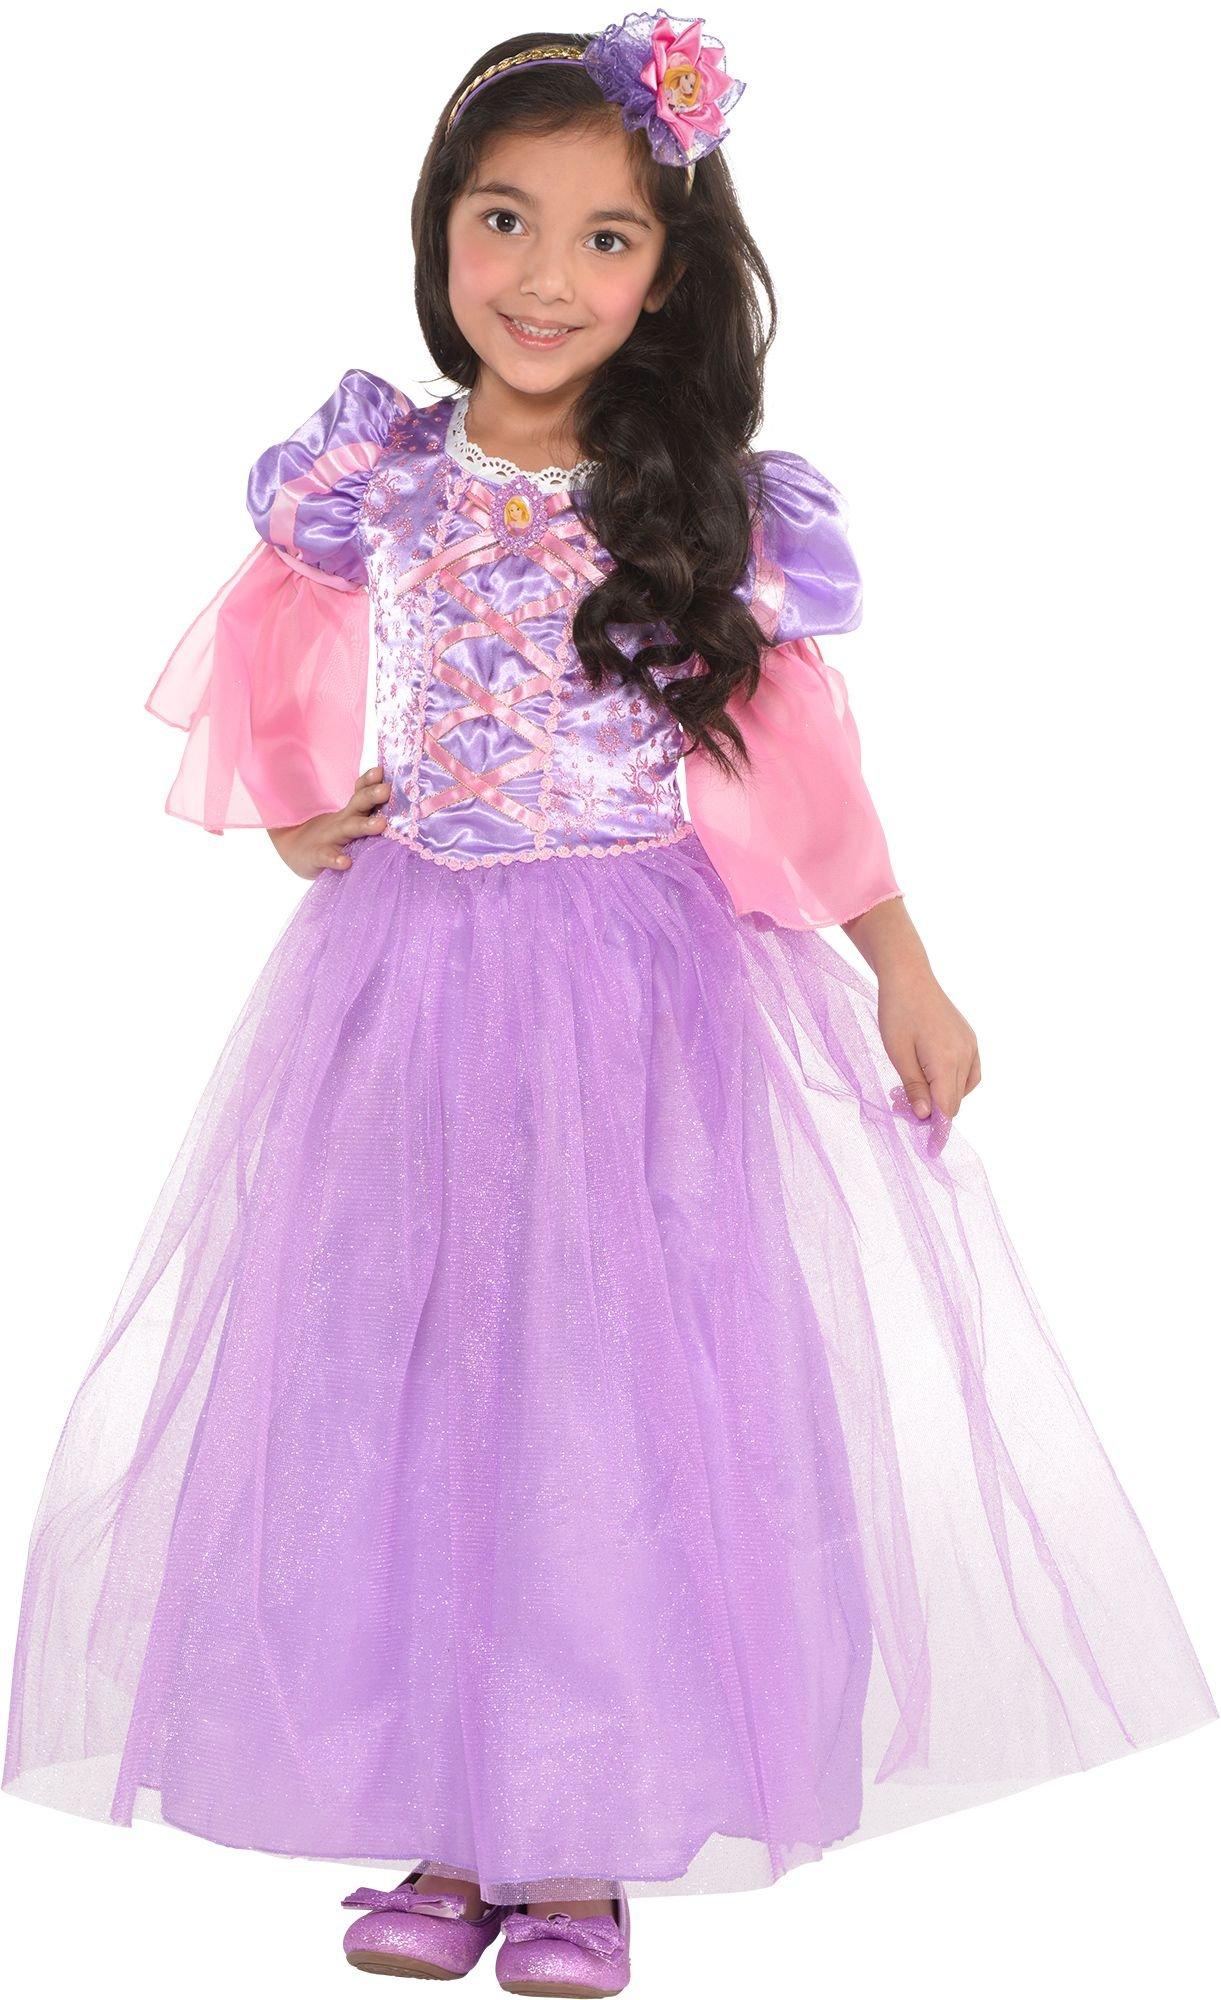 Girls Rapunzel Costume - Tangled | Party City